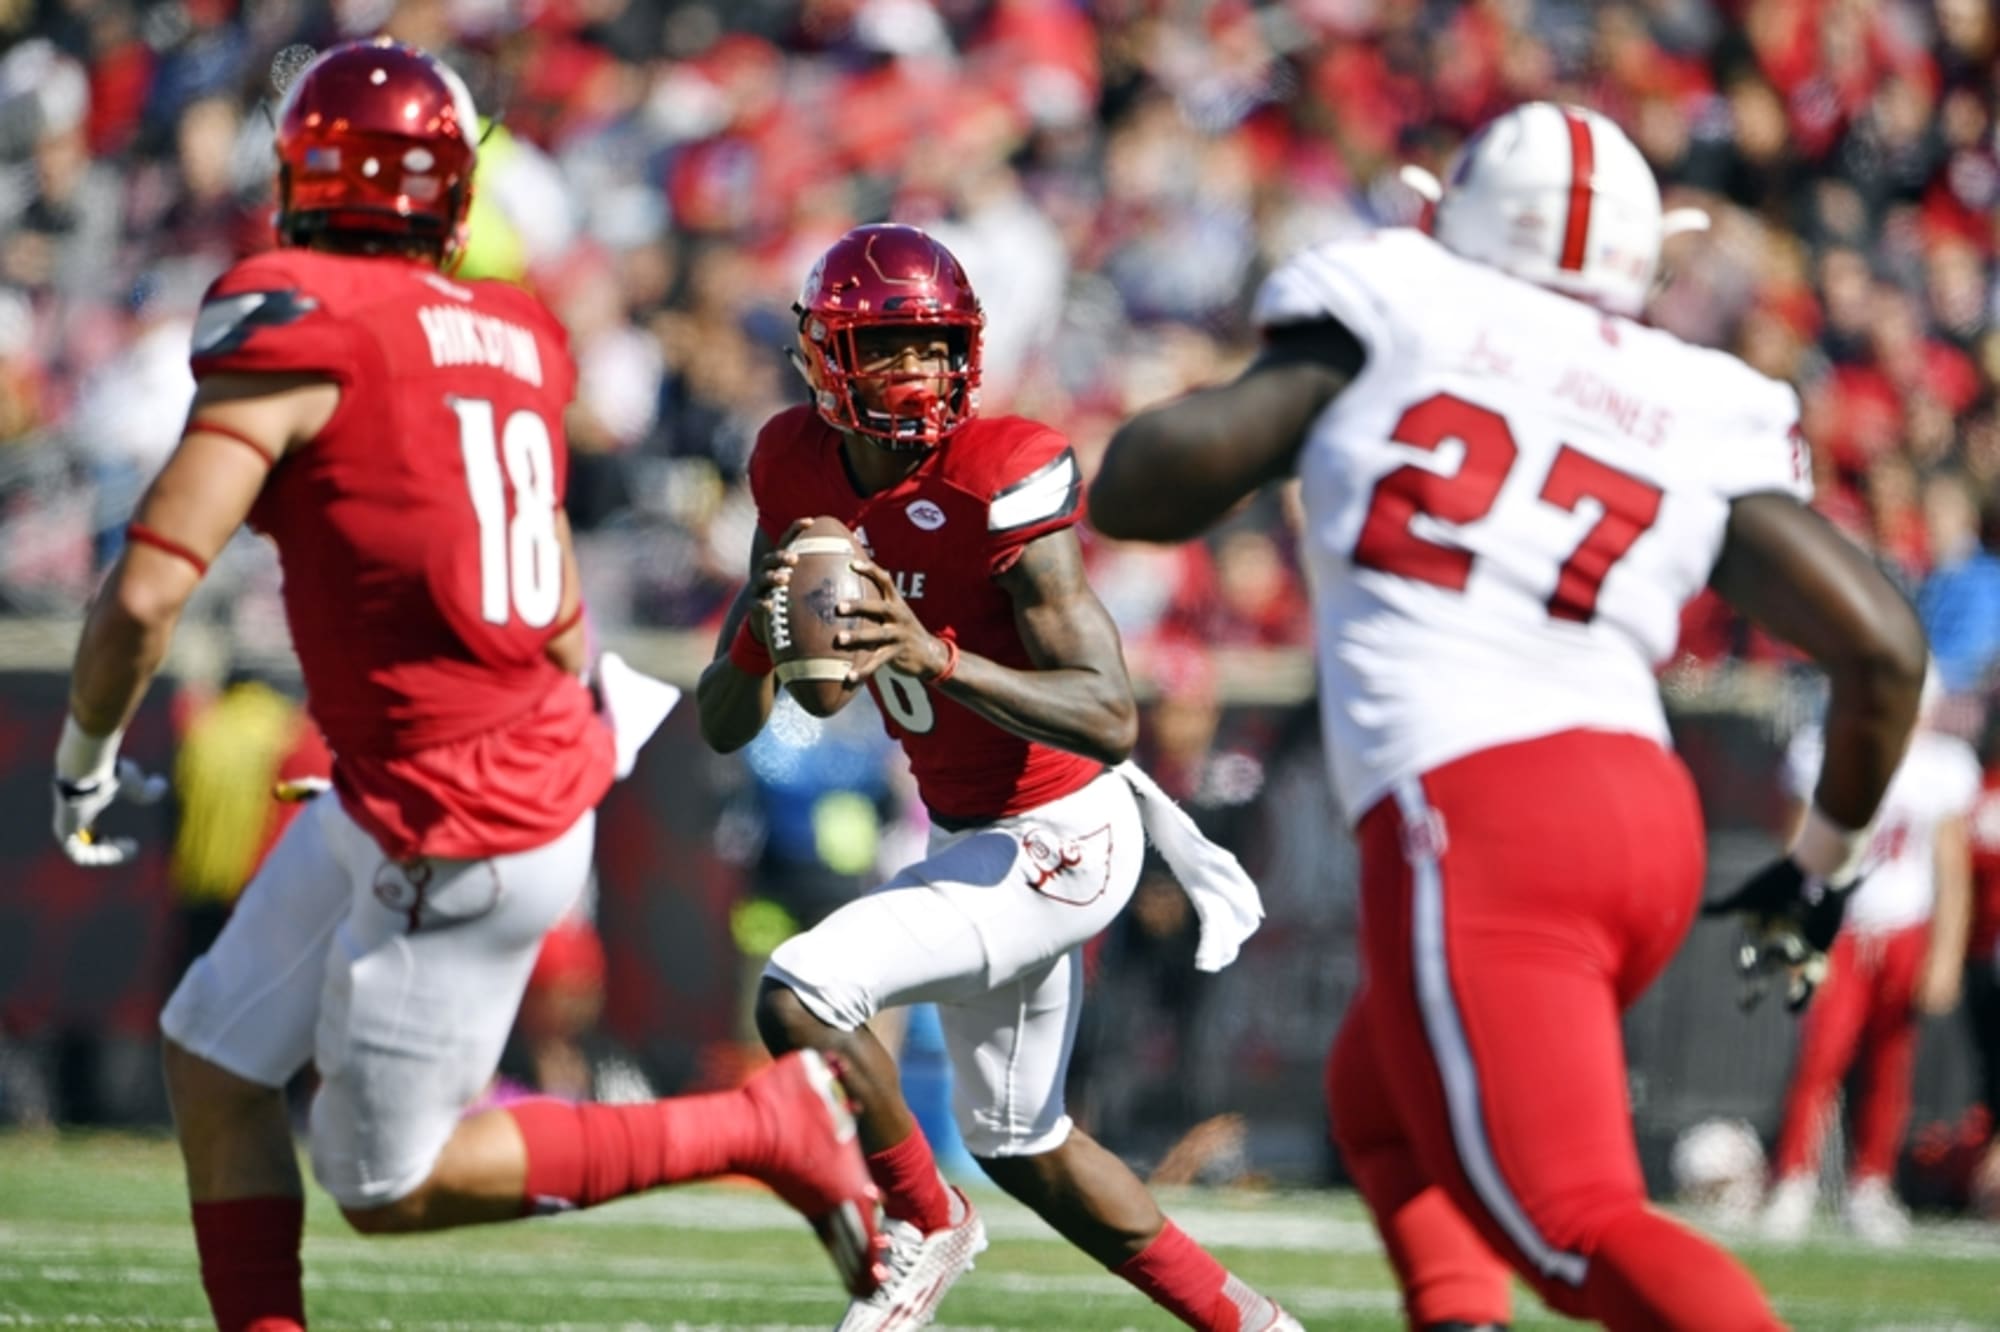 Predicting where the Louisville football team will be ranked after week 8